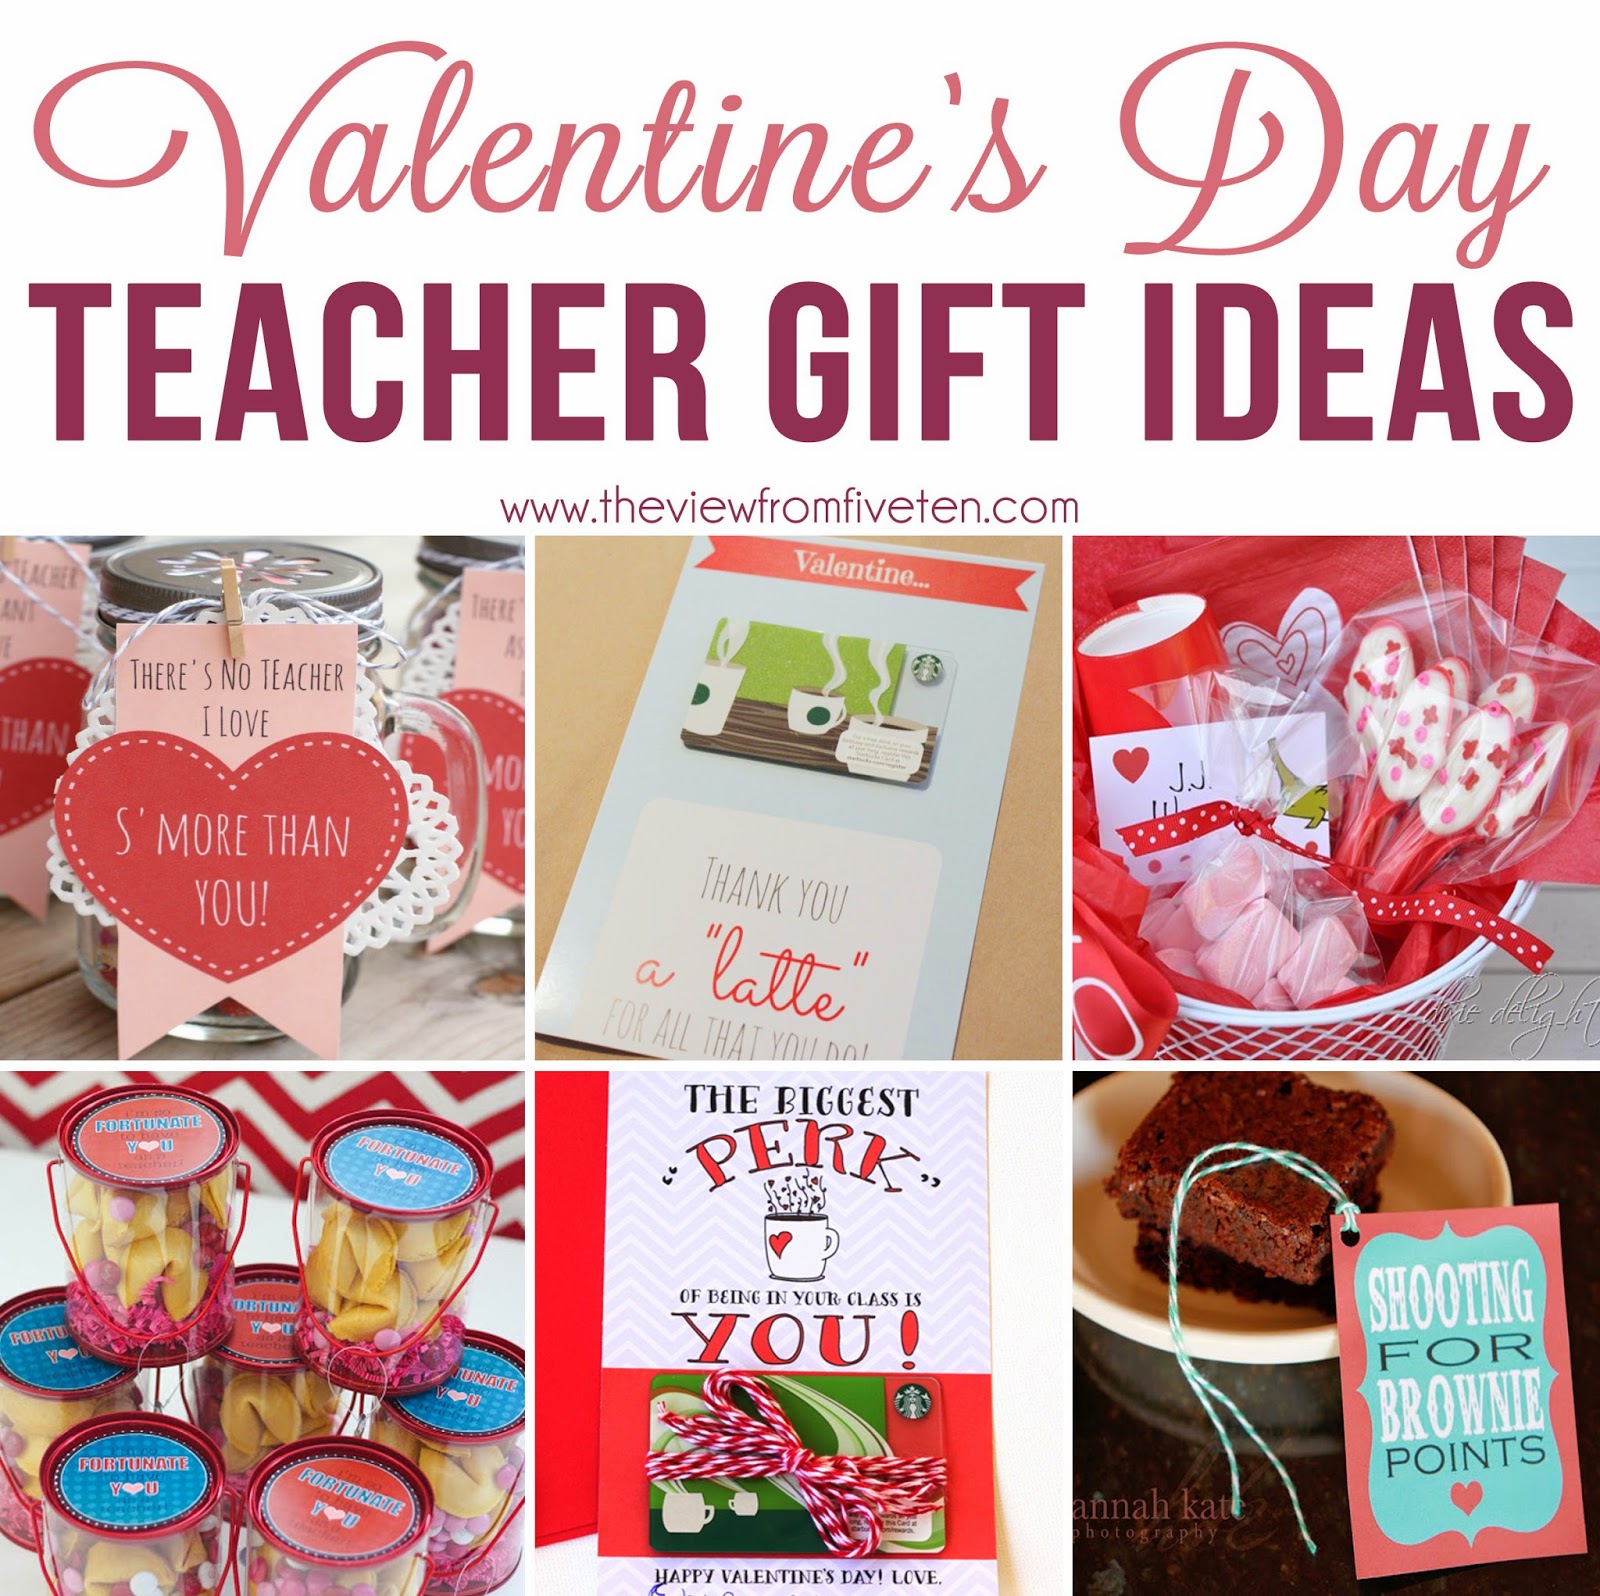 The View From 510: Valentine's Day Gift Ideas for Teachers